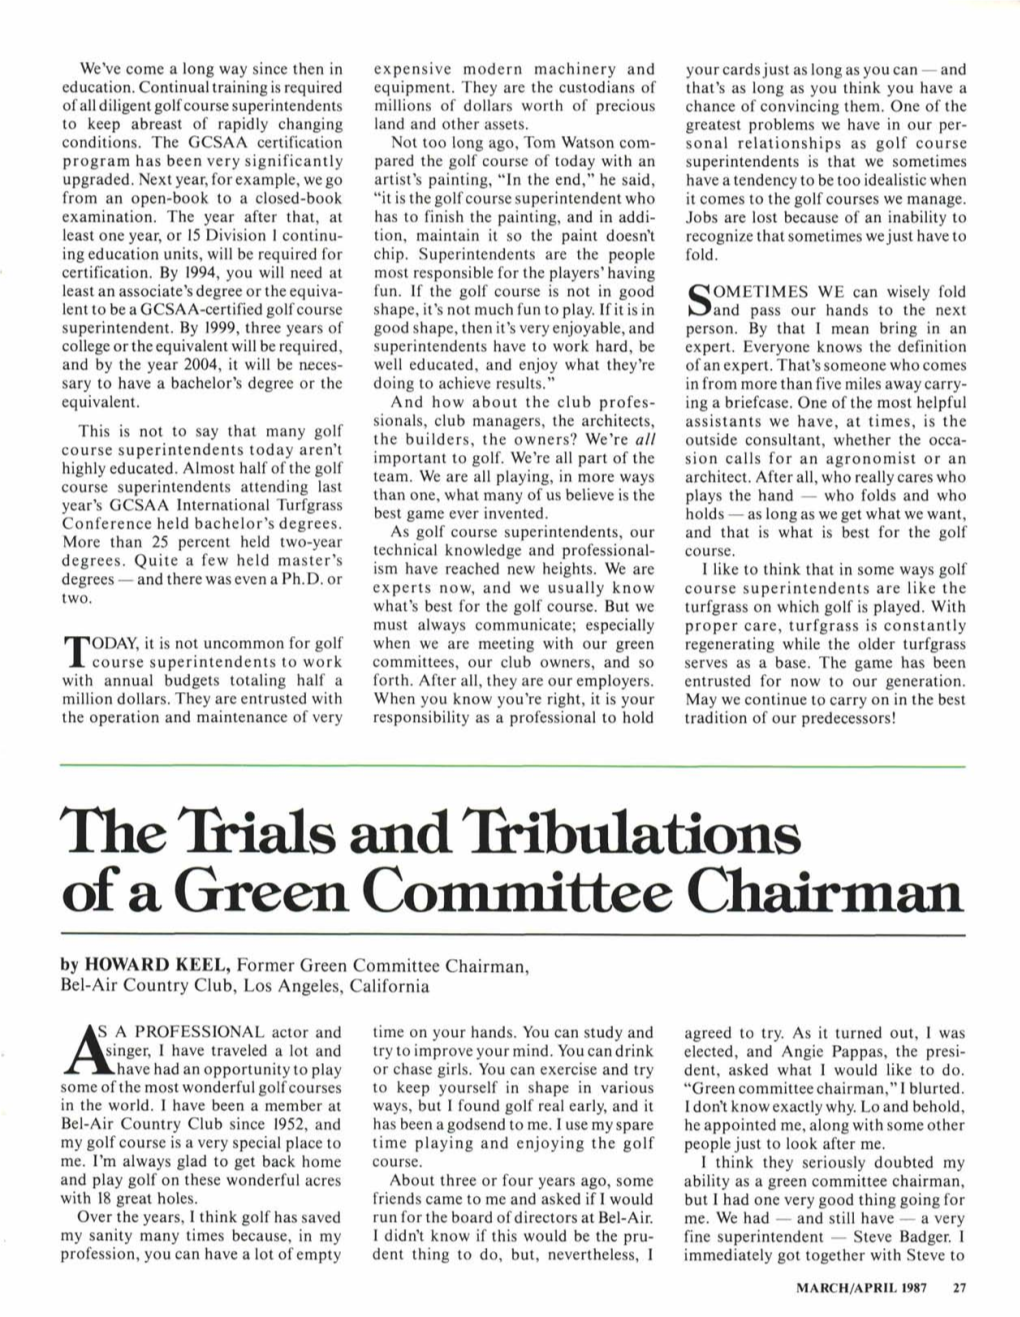 The Llials and 1H.Bulations of a Green Committee Chairman by HOWARD KEEL, Former Green Committee Chairman, Bel-Air Country Club, Los Angeles, California